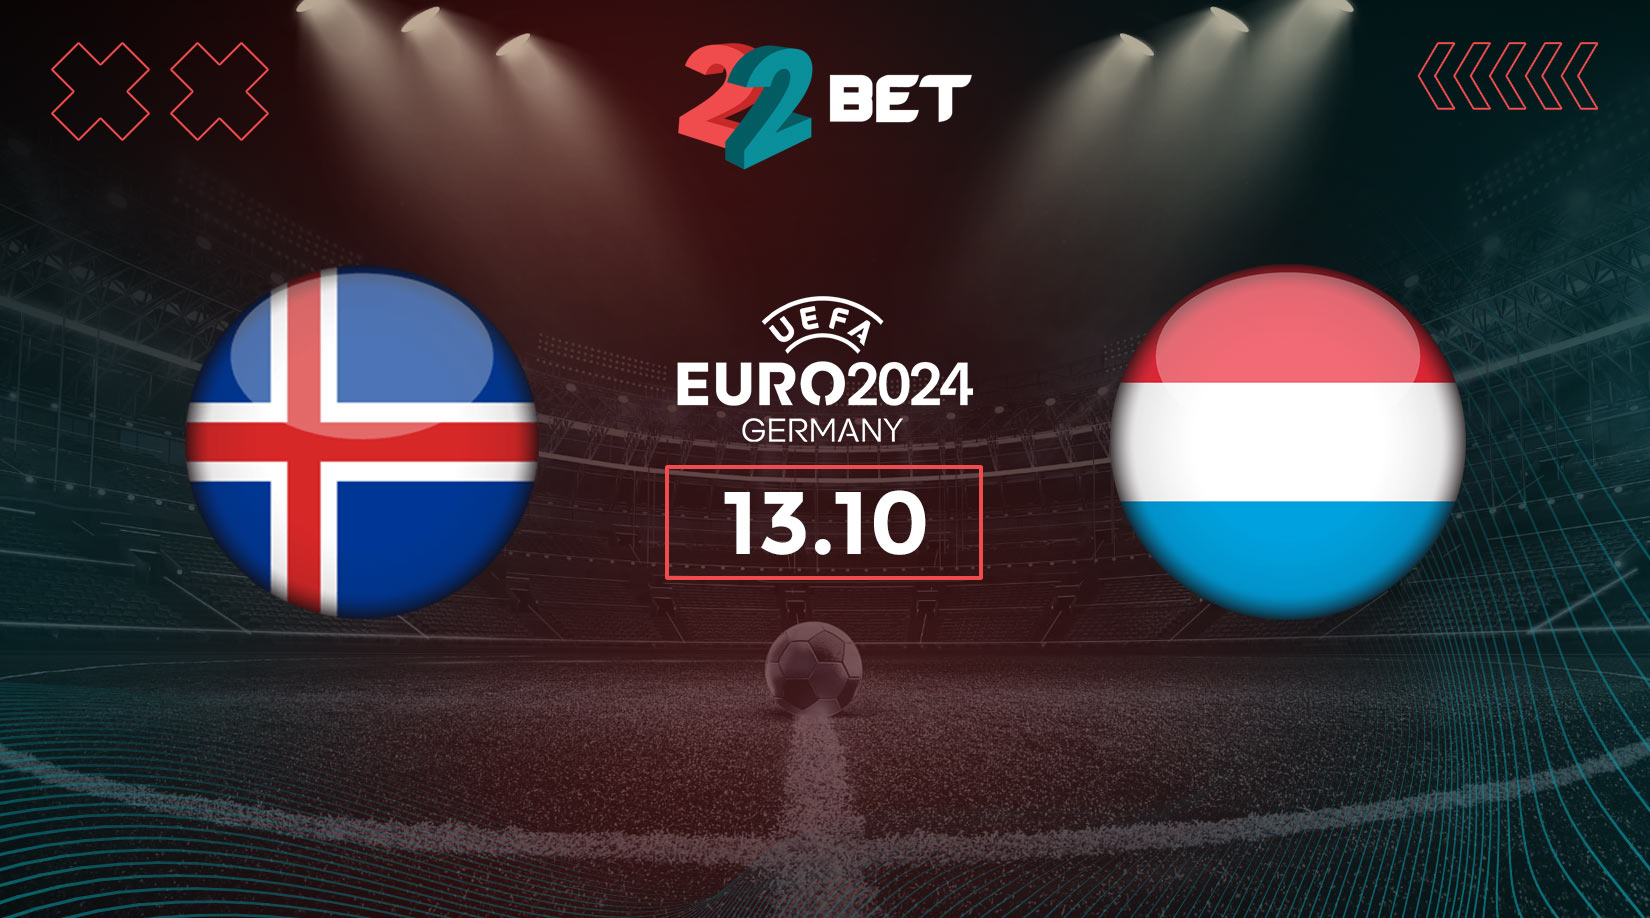 Iceland vs Luxembourg Prediction: Euro 2024 Match on 13.10.2023